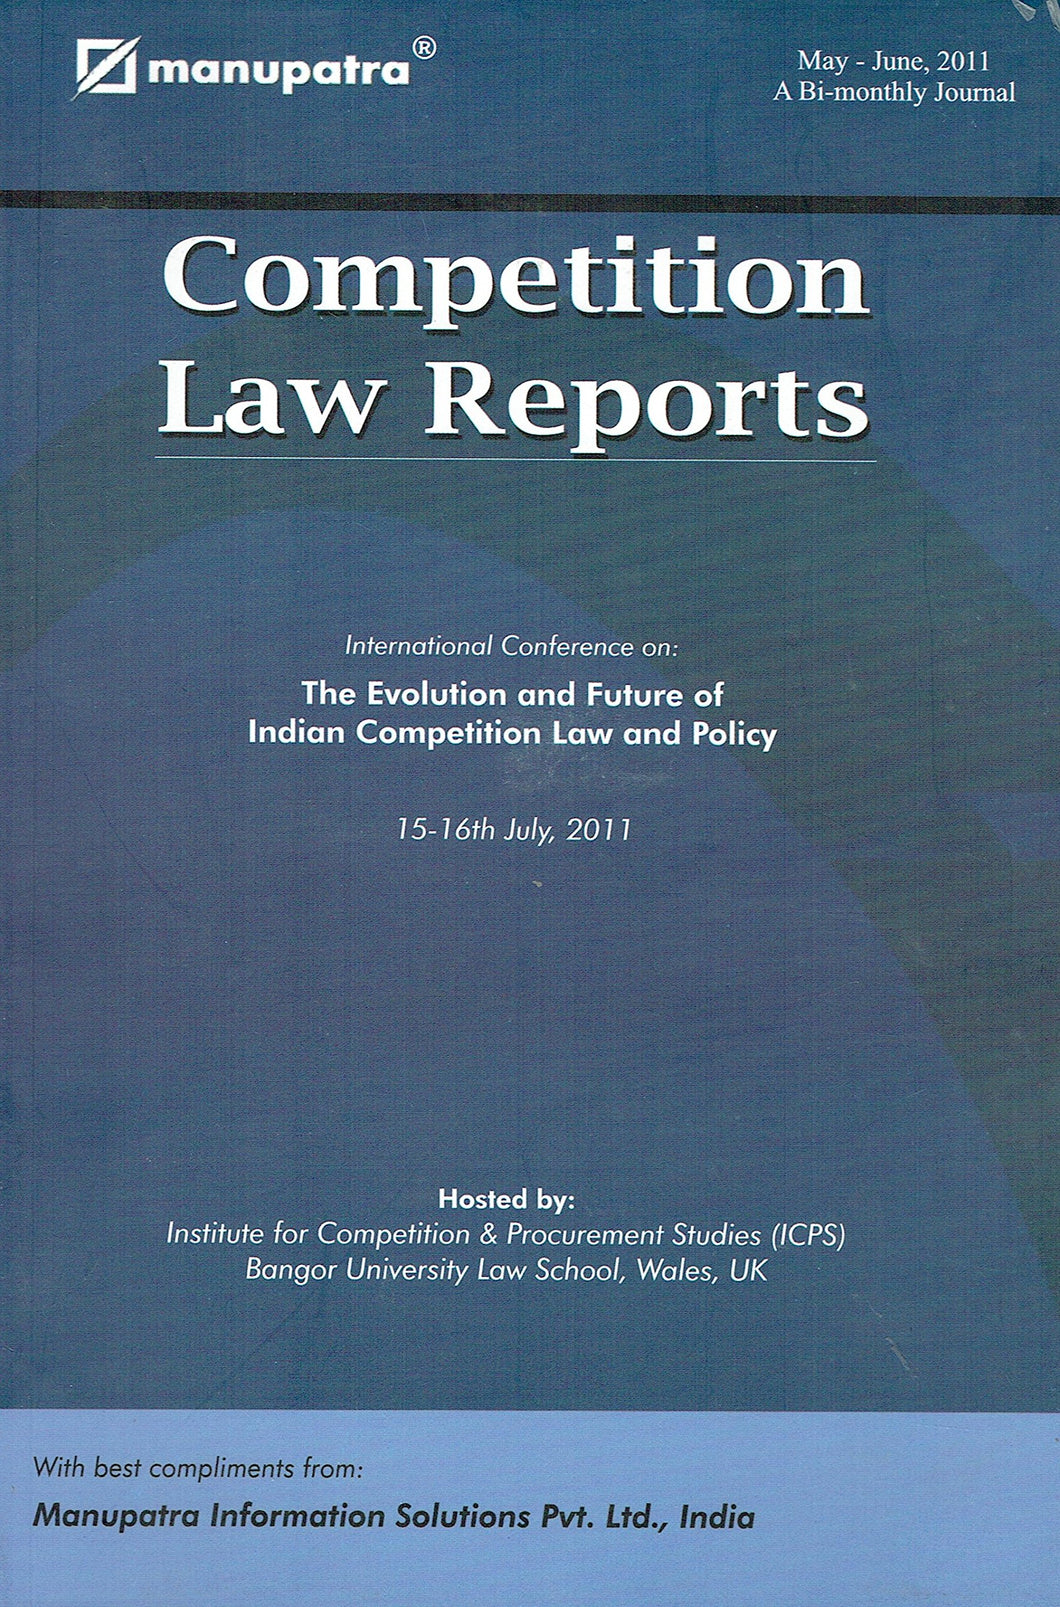 Manupatra Competition Law Reports - International Conference on: The Evolution and Future of Indian Competition Law and Policy, 15-16th July, 2011